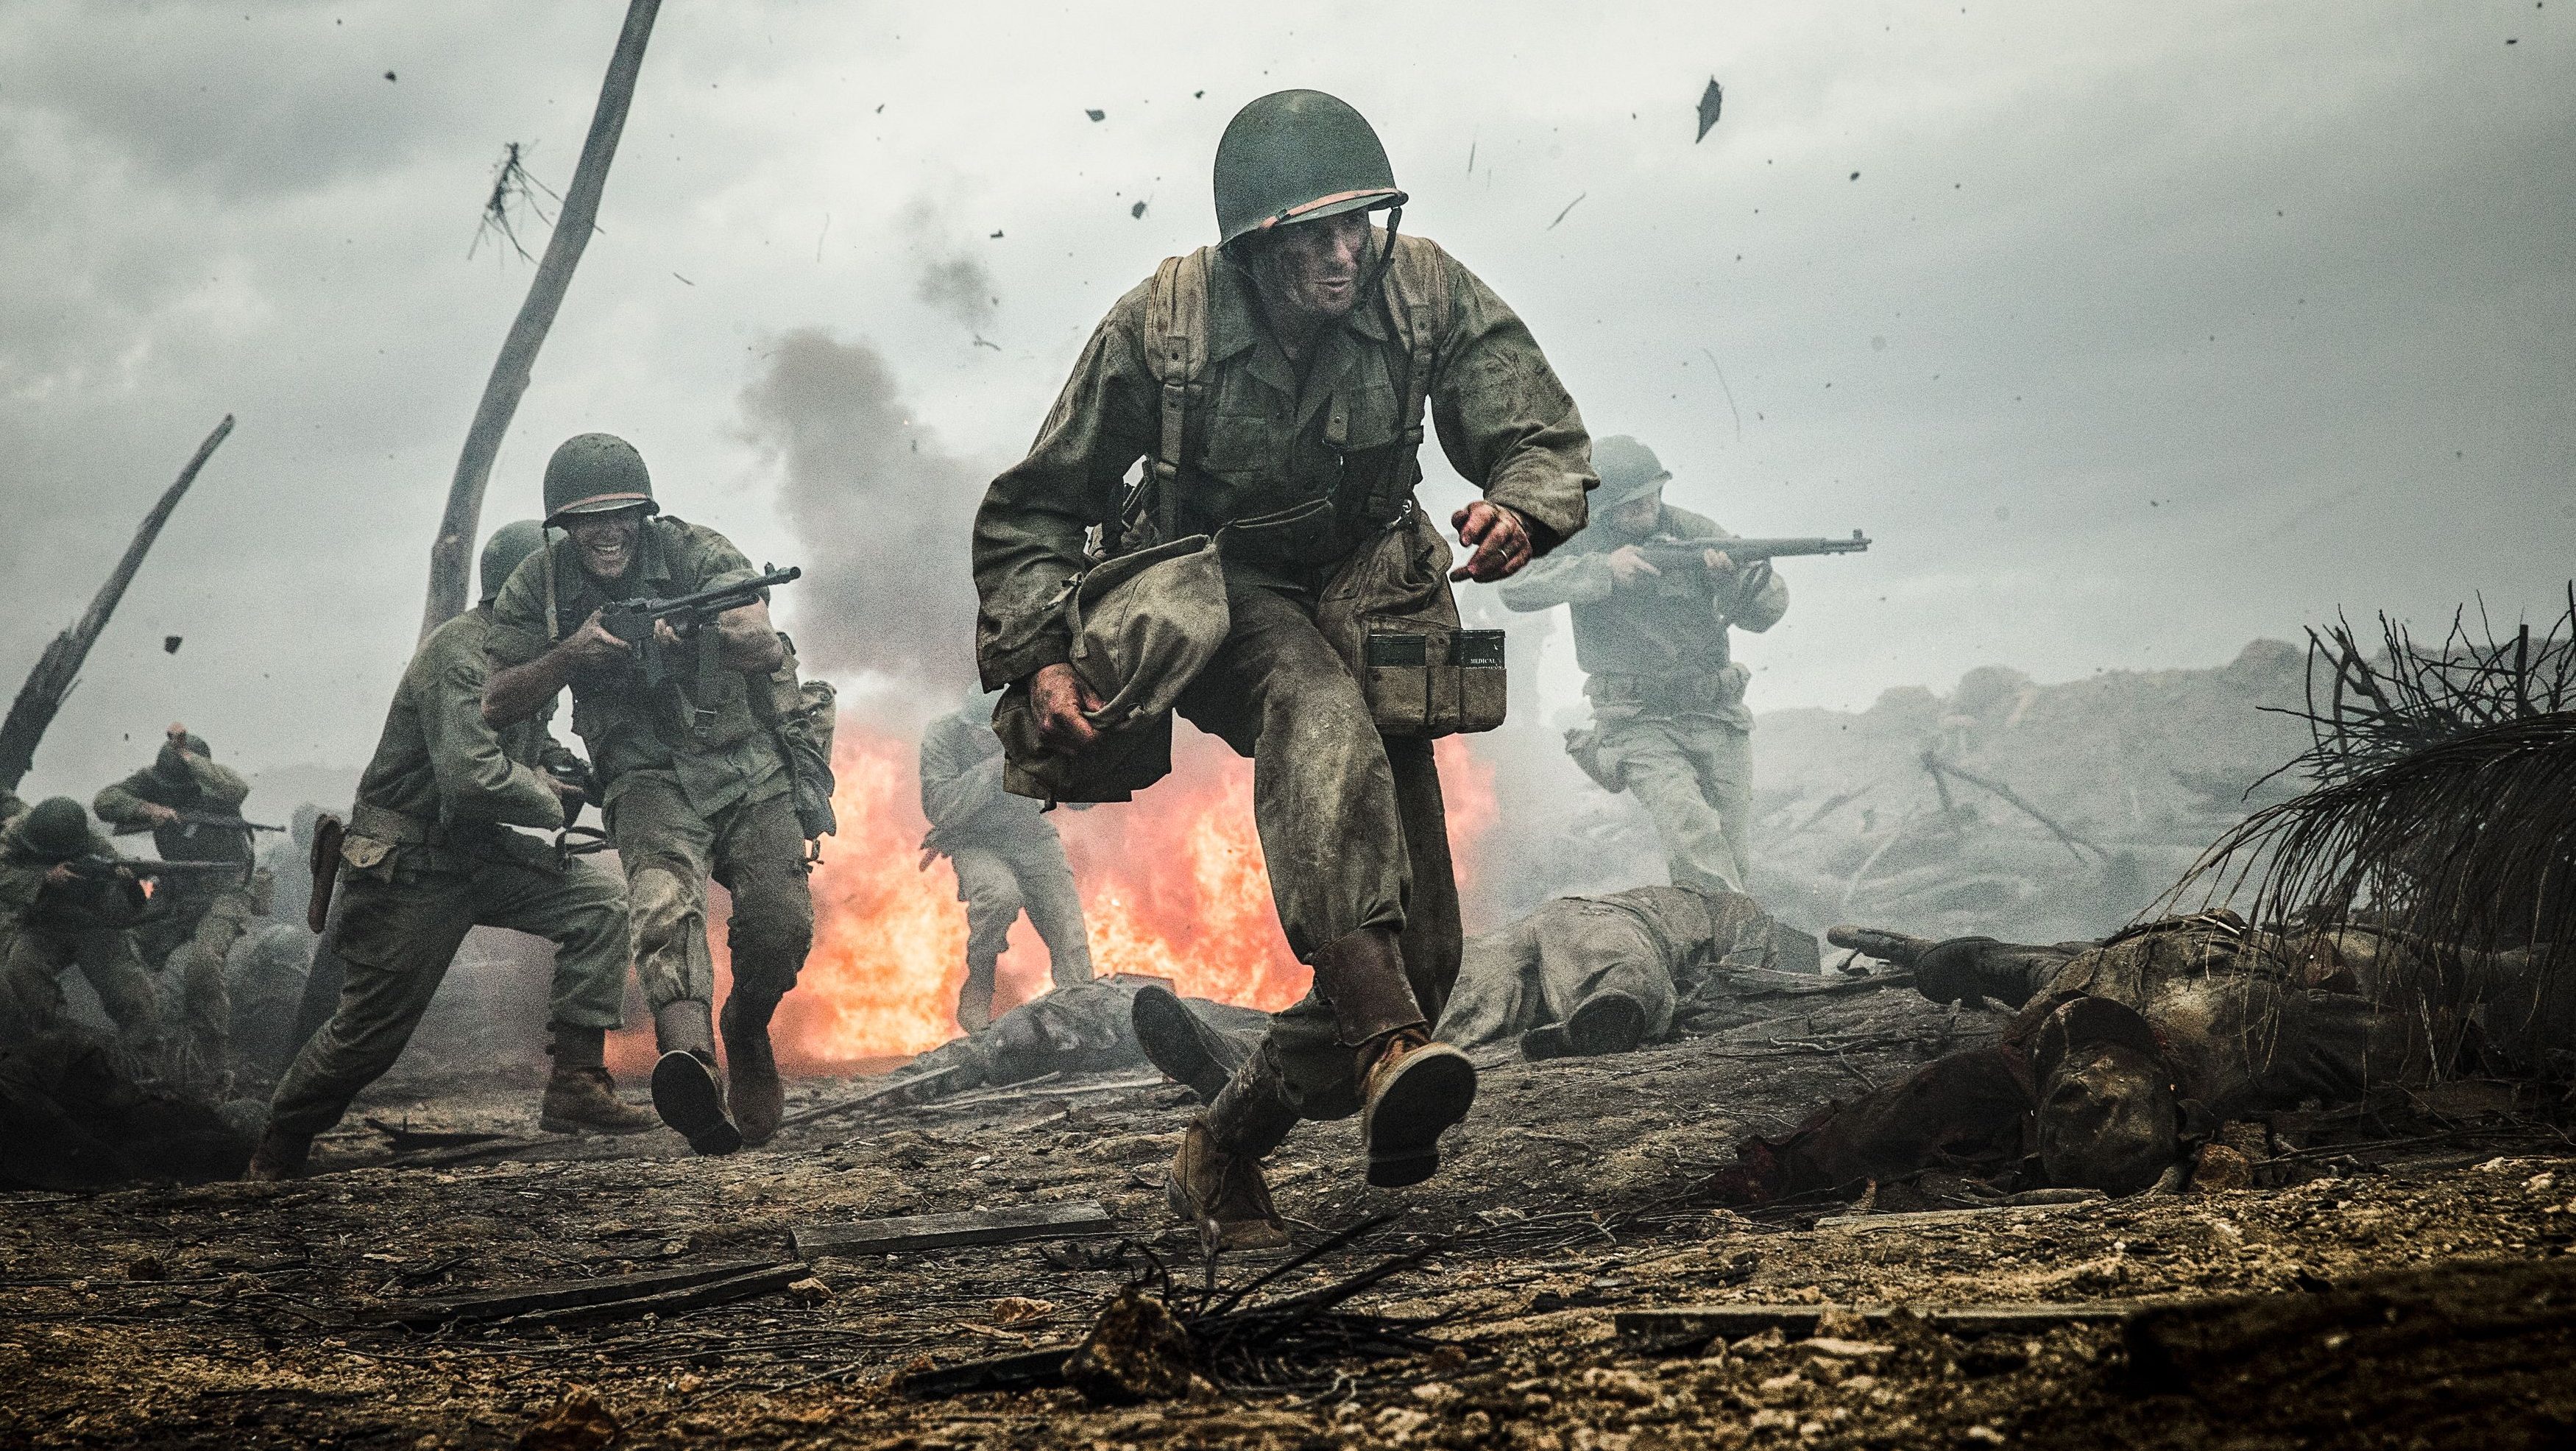 Mel Gibson returns with a bang in new WW2 epic Hacksaw Ridge